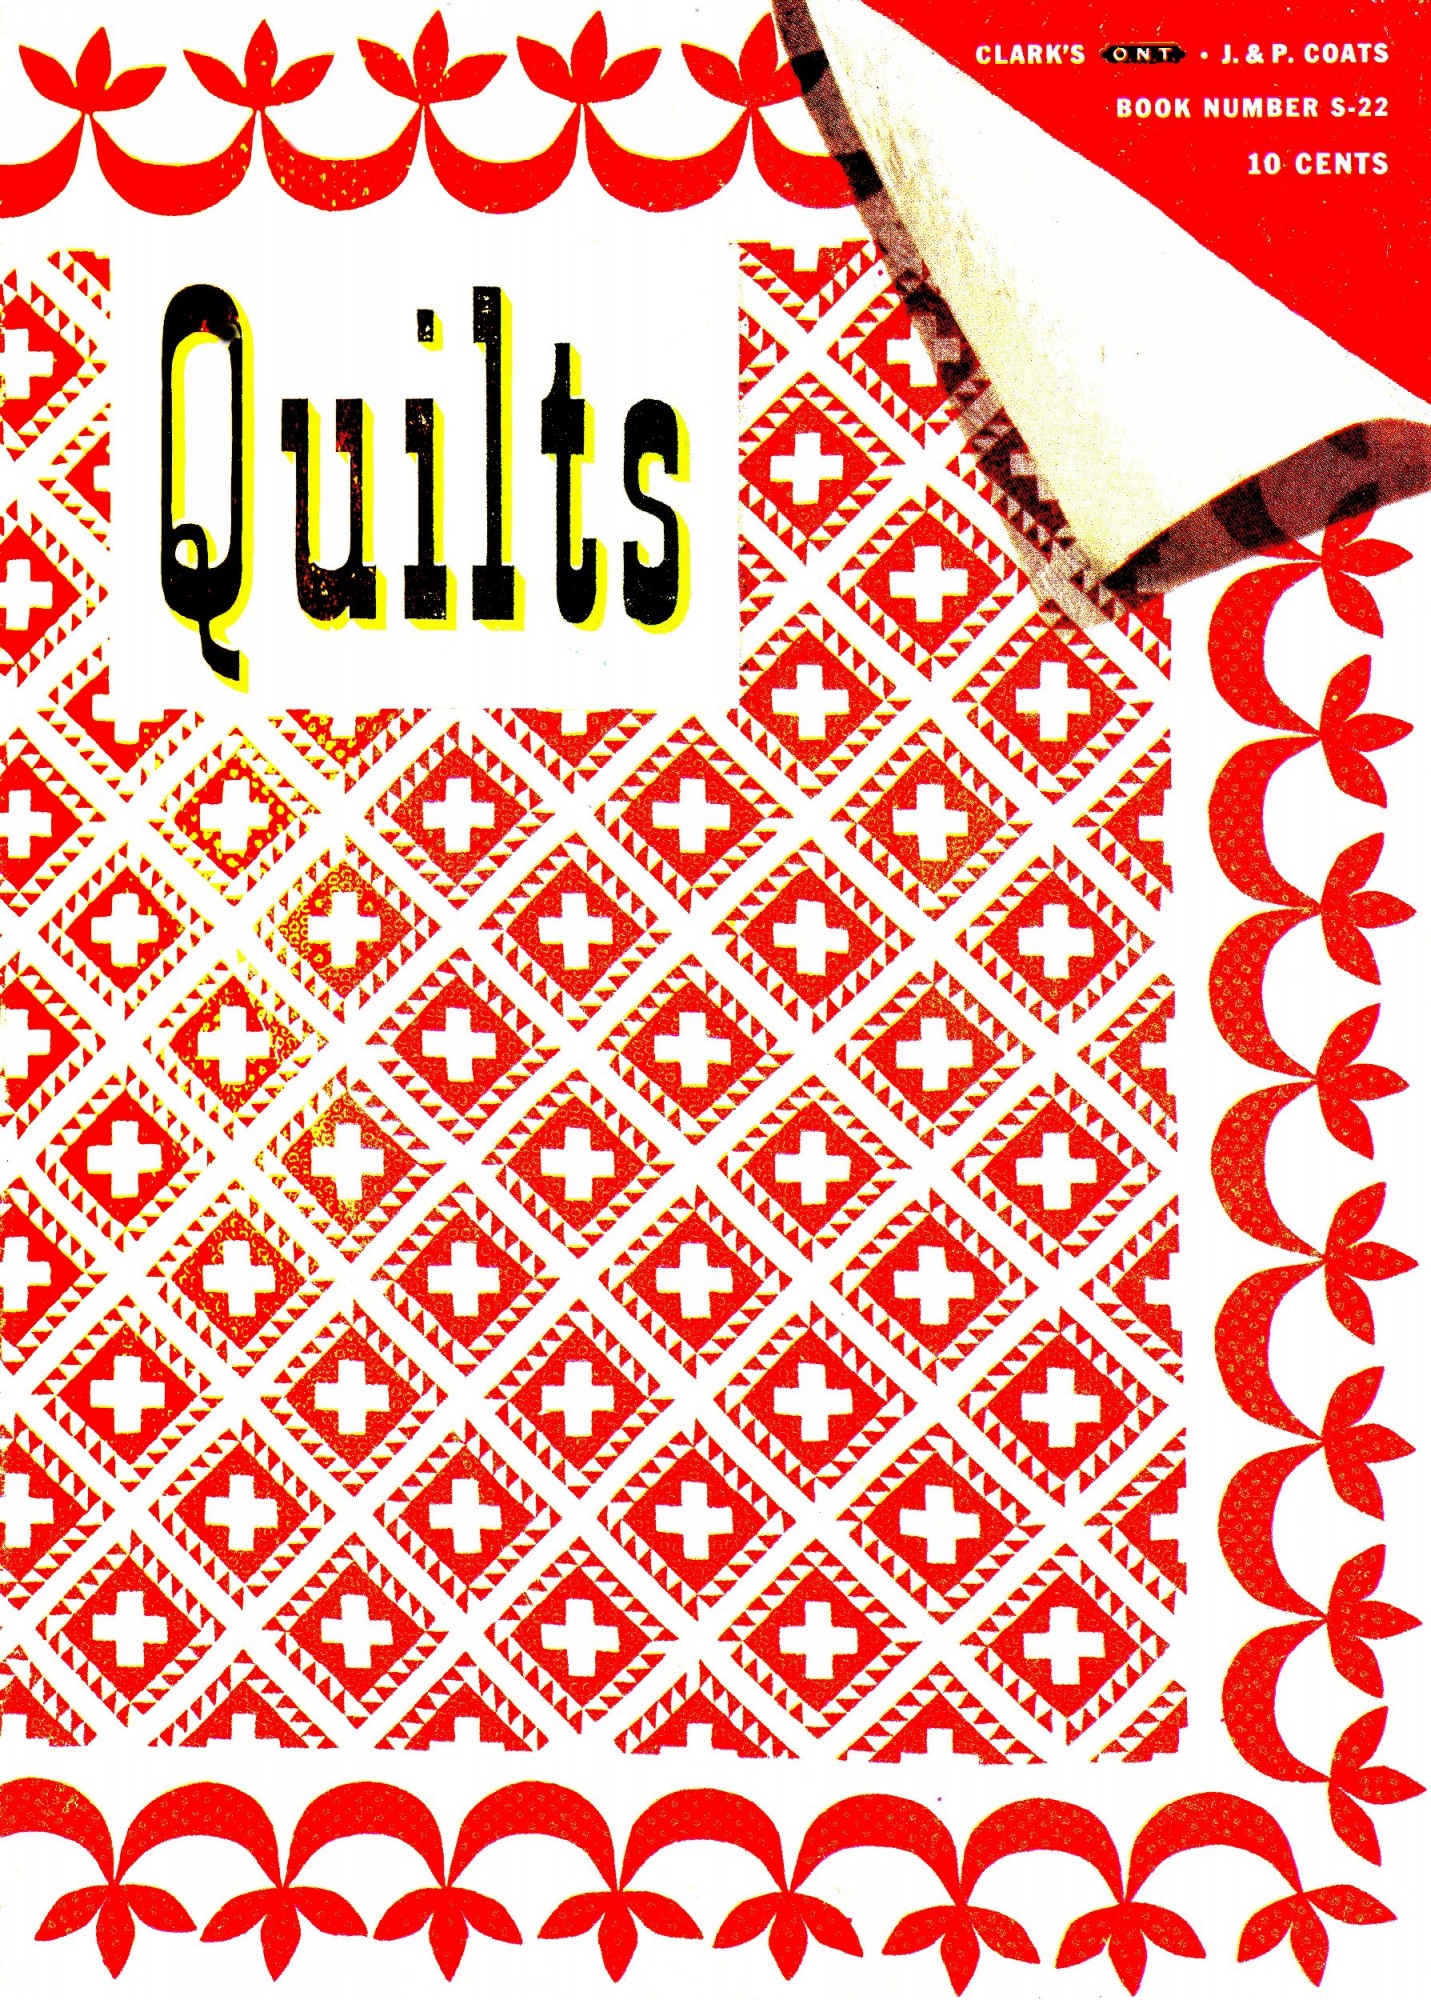 Spool Cotton "Quilts" 1945 | Book S-22